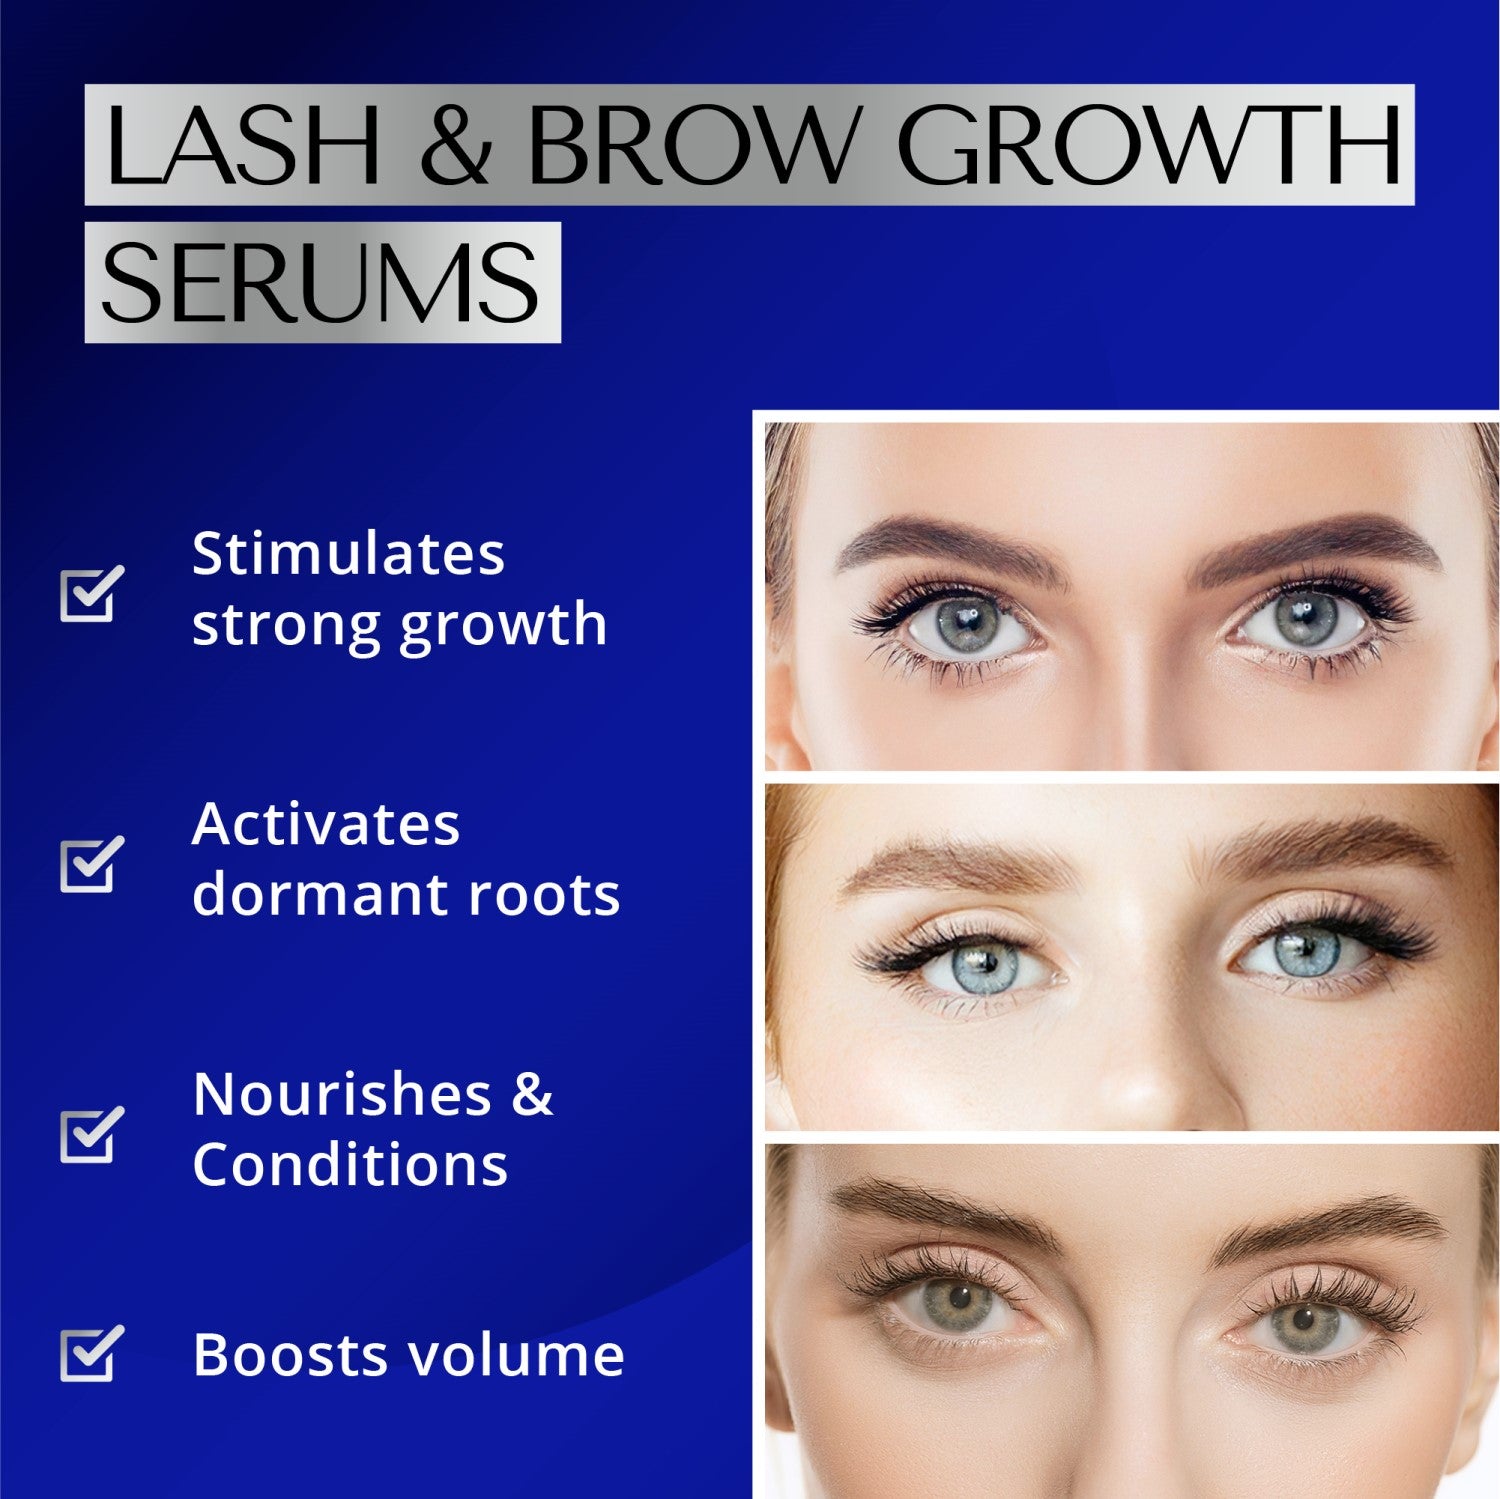 Dermaworks lash and brow growth serums boost volume, nourish, condition, hydrate and stimulate strong hair growth.